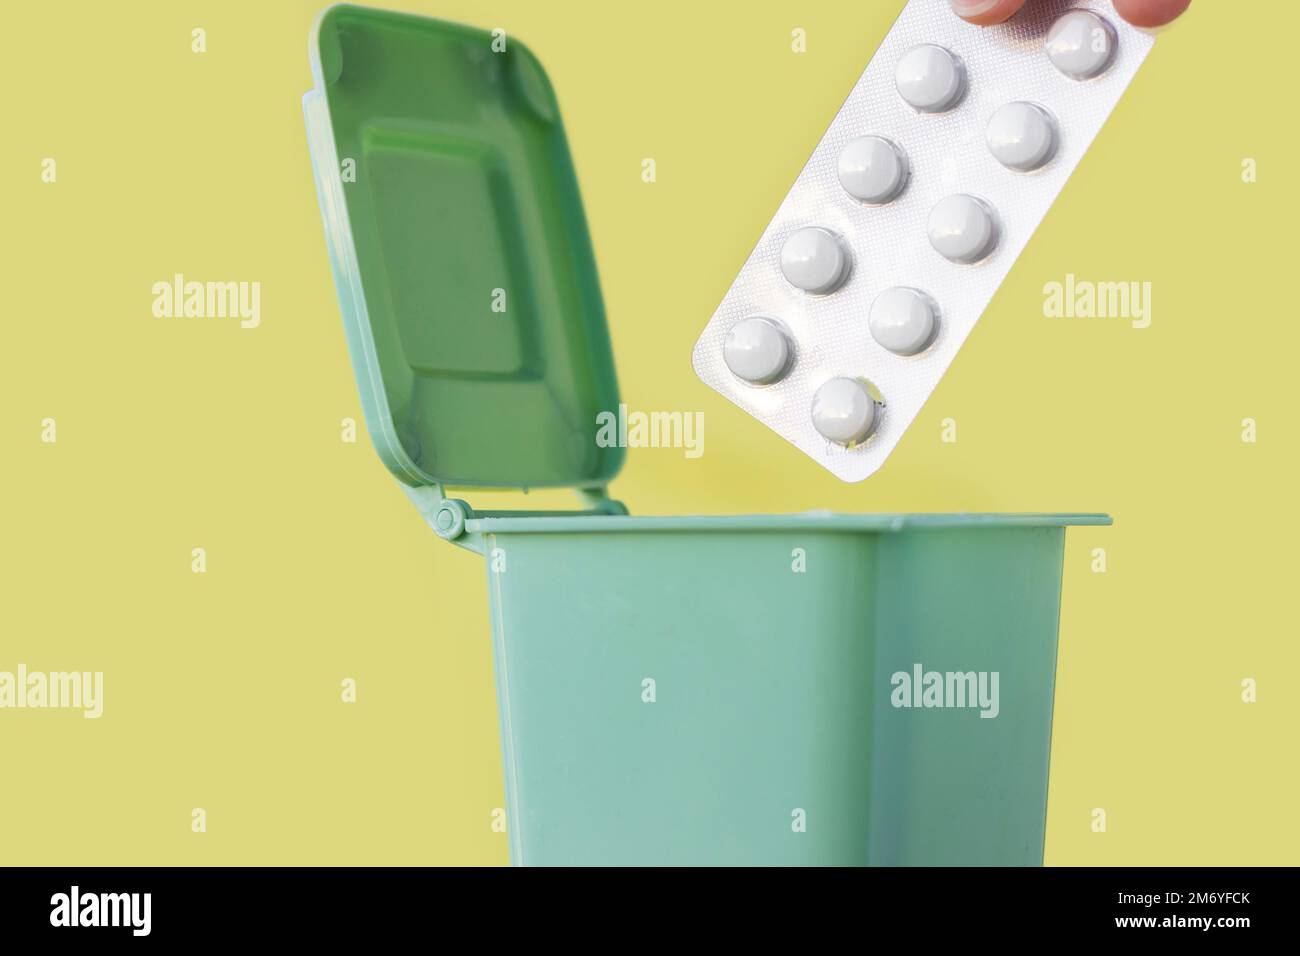 https://c8.alamy.com/comp/2M6YFCK/plastic-blister-thrown-in-mini-small-trash-garbage-bin-canexpired-pills-blister-with-removed-missing-tablets-isolatedunused-or-expired-medicine-drop-2M6YFCK.jpg